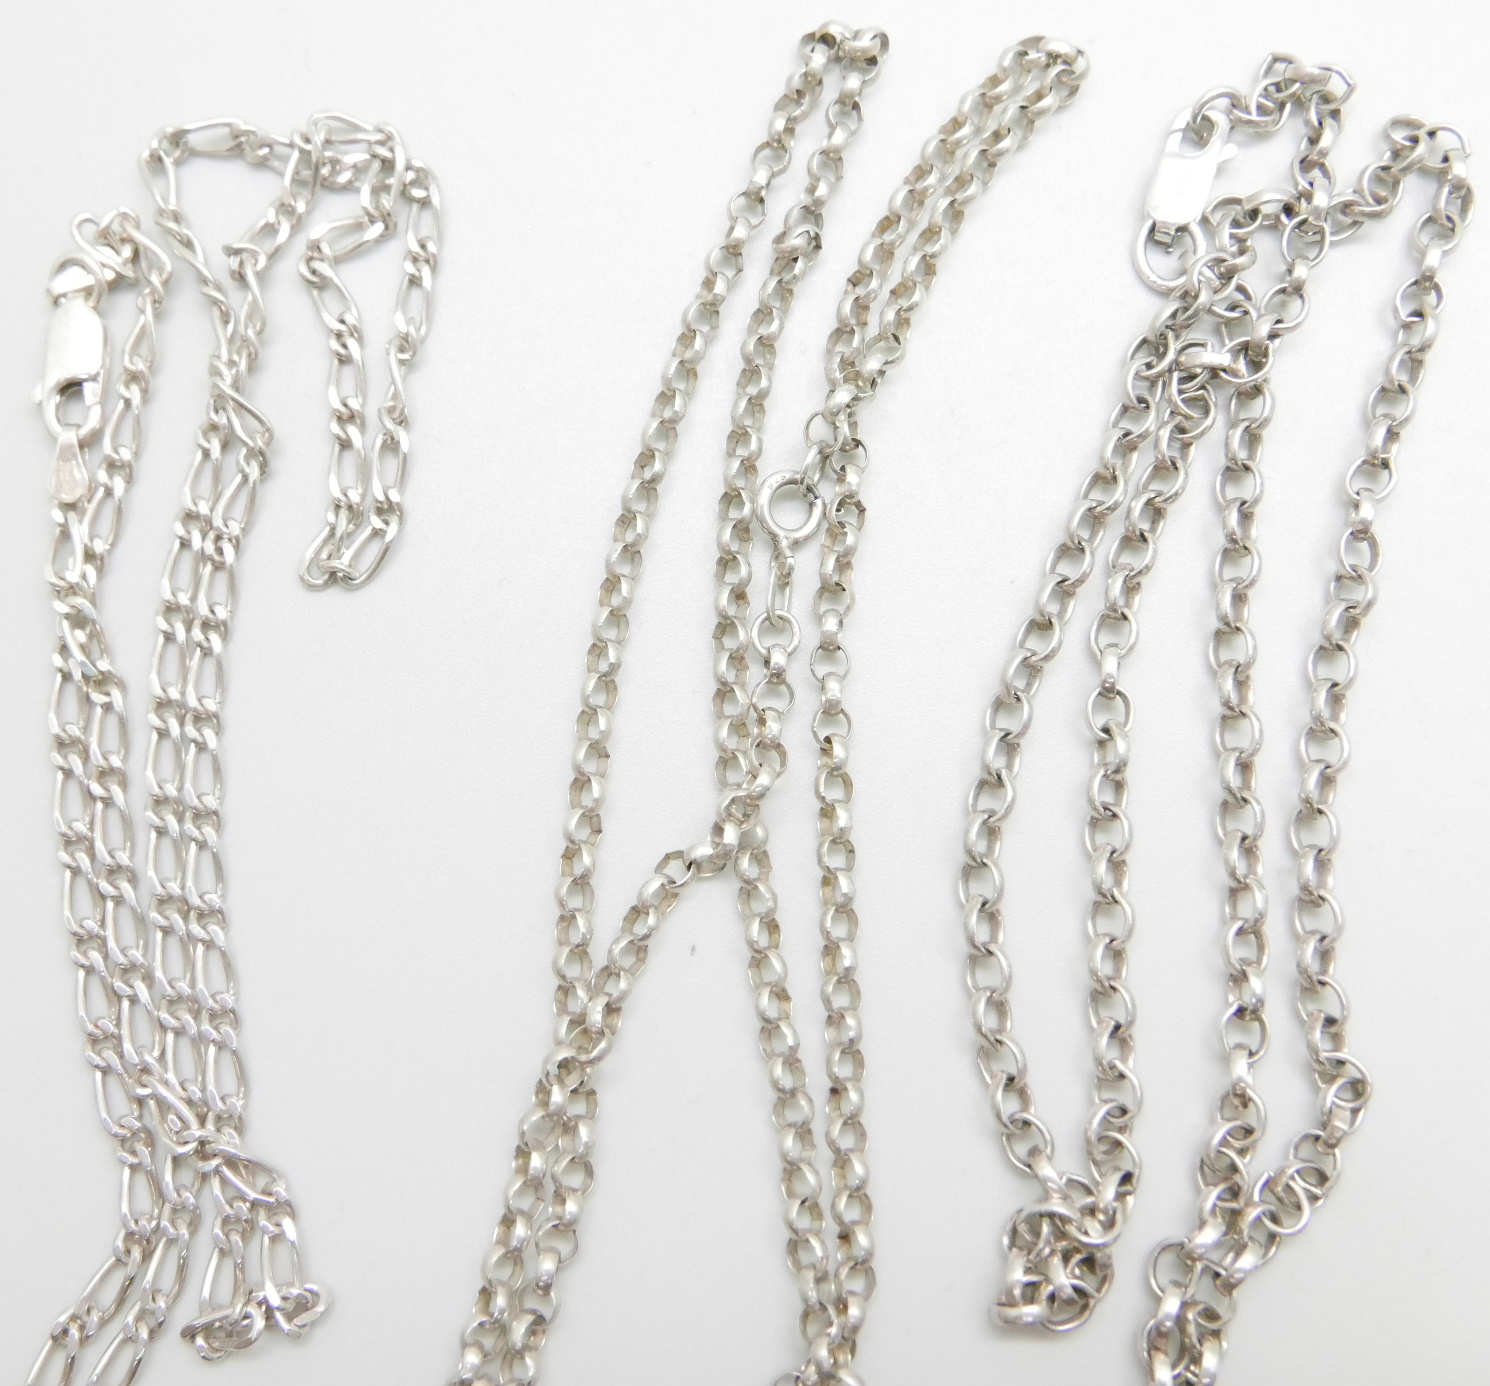 Three silver neck chains, 27g, each 50cm - Image 2 of 2